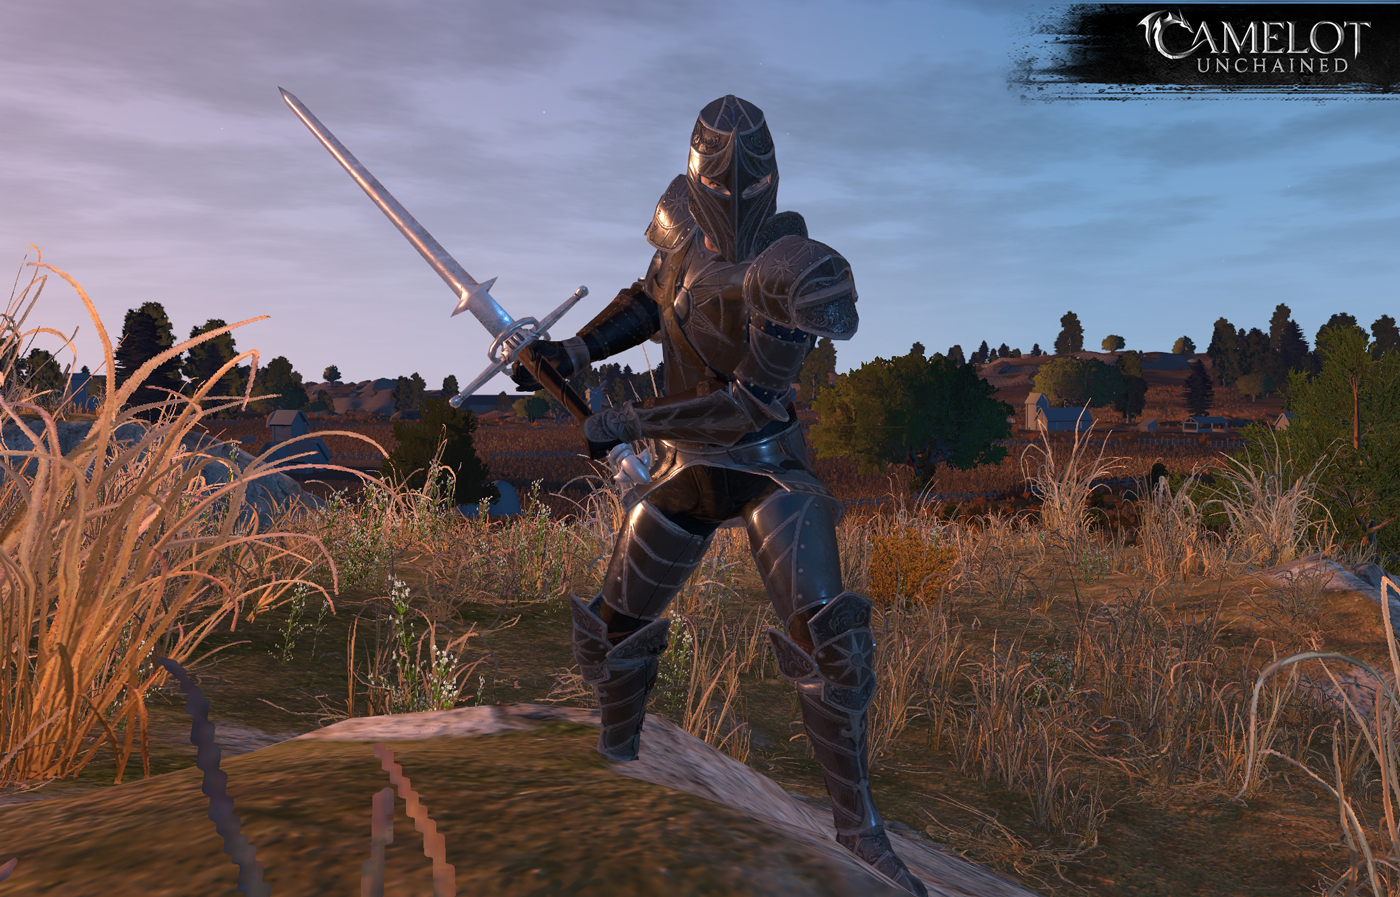 Camelot Unchained Brings the Harvest in Latest Update